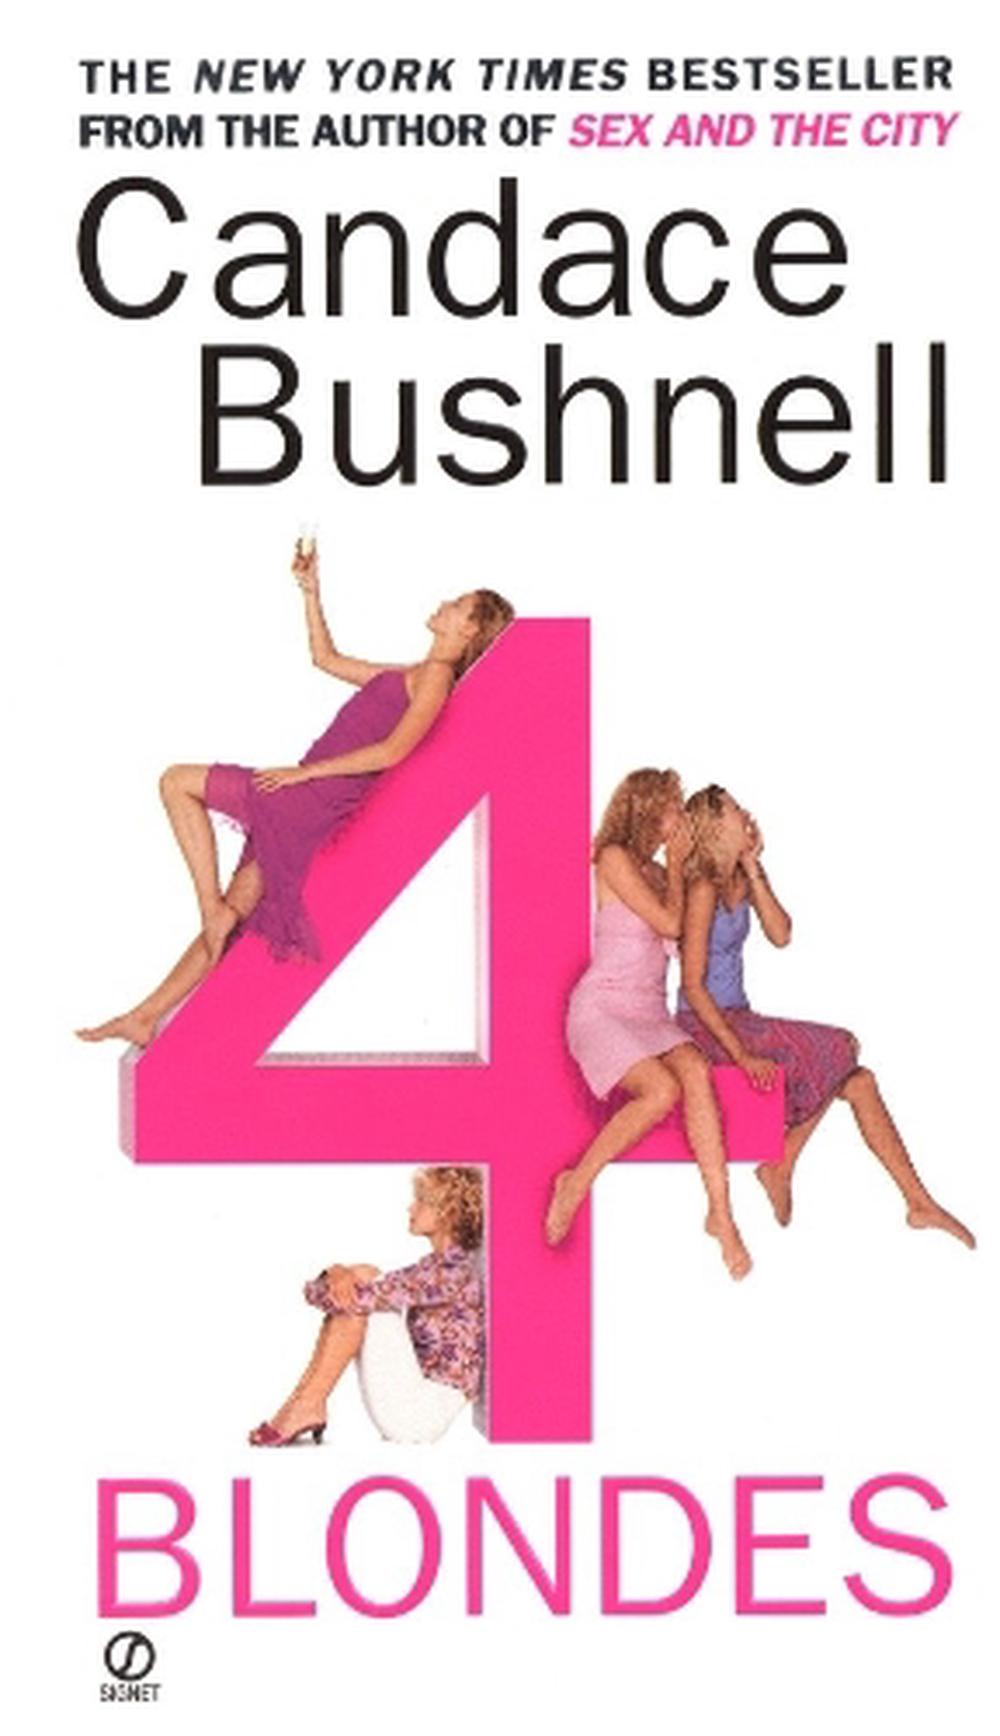 4 Blondes By Candace Bushnell English Mass Market Paperback Book Free